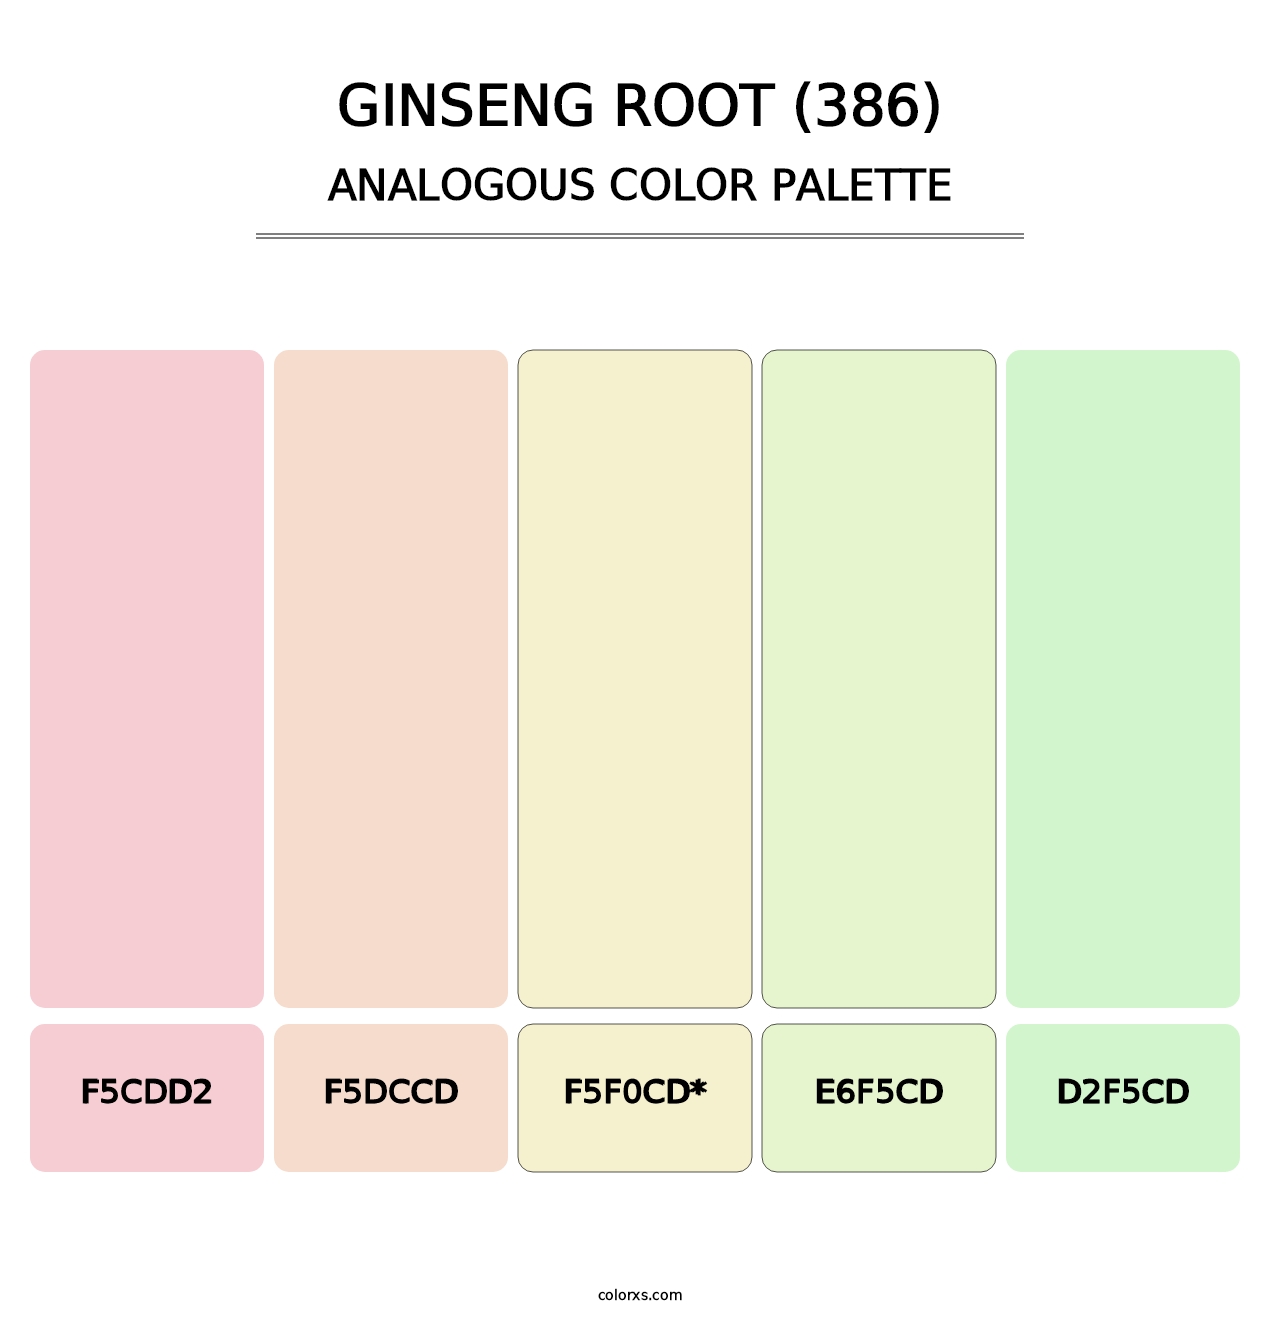 Ginseng Root (386) - Analogous Color Palette